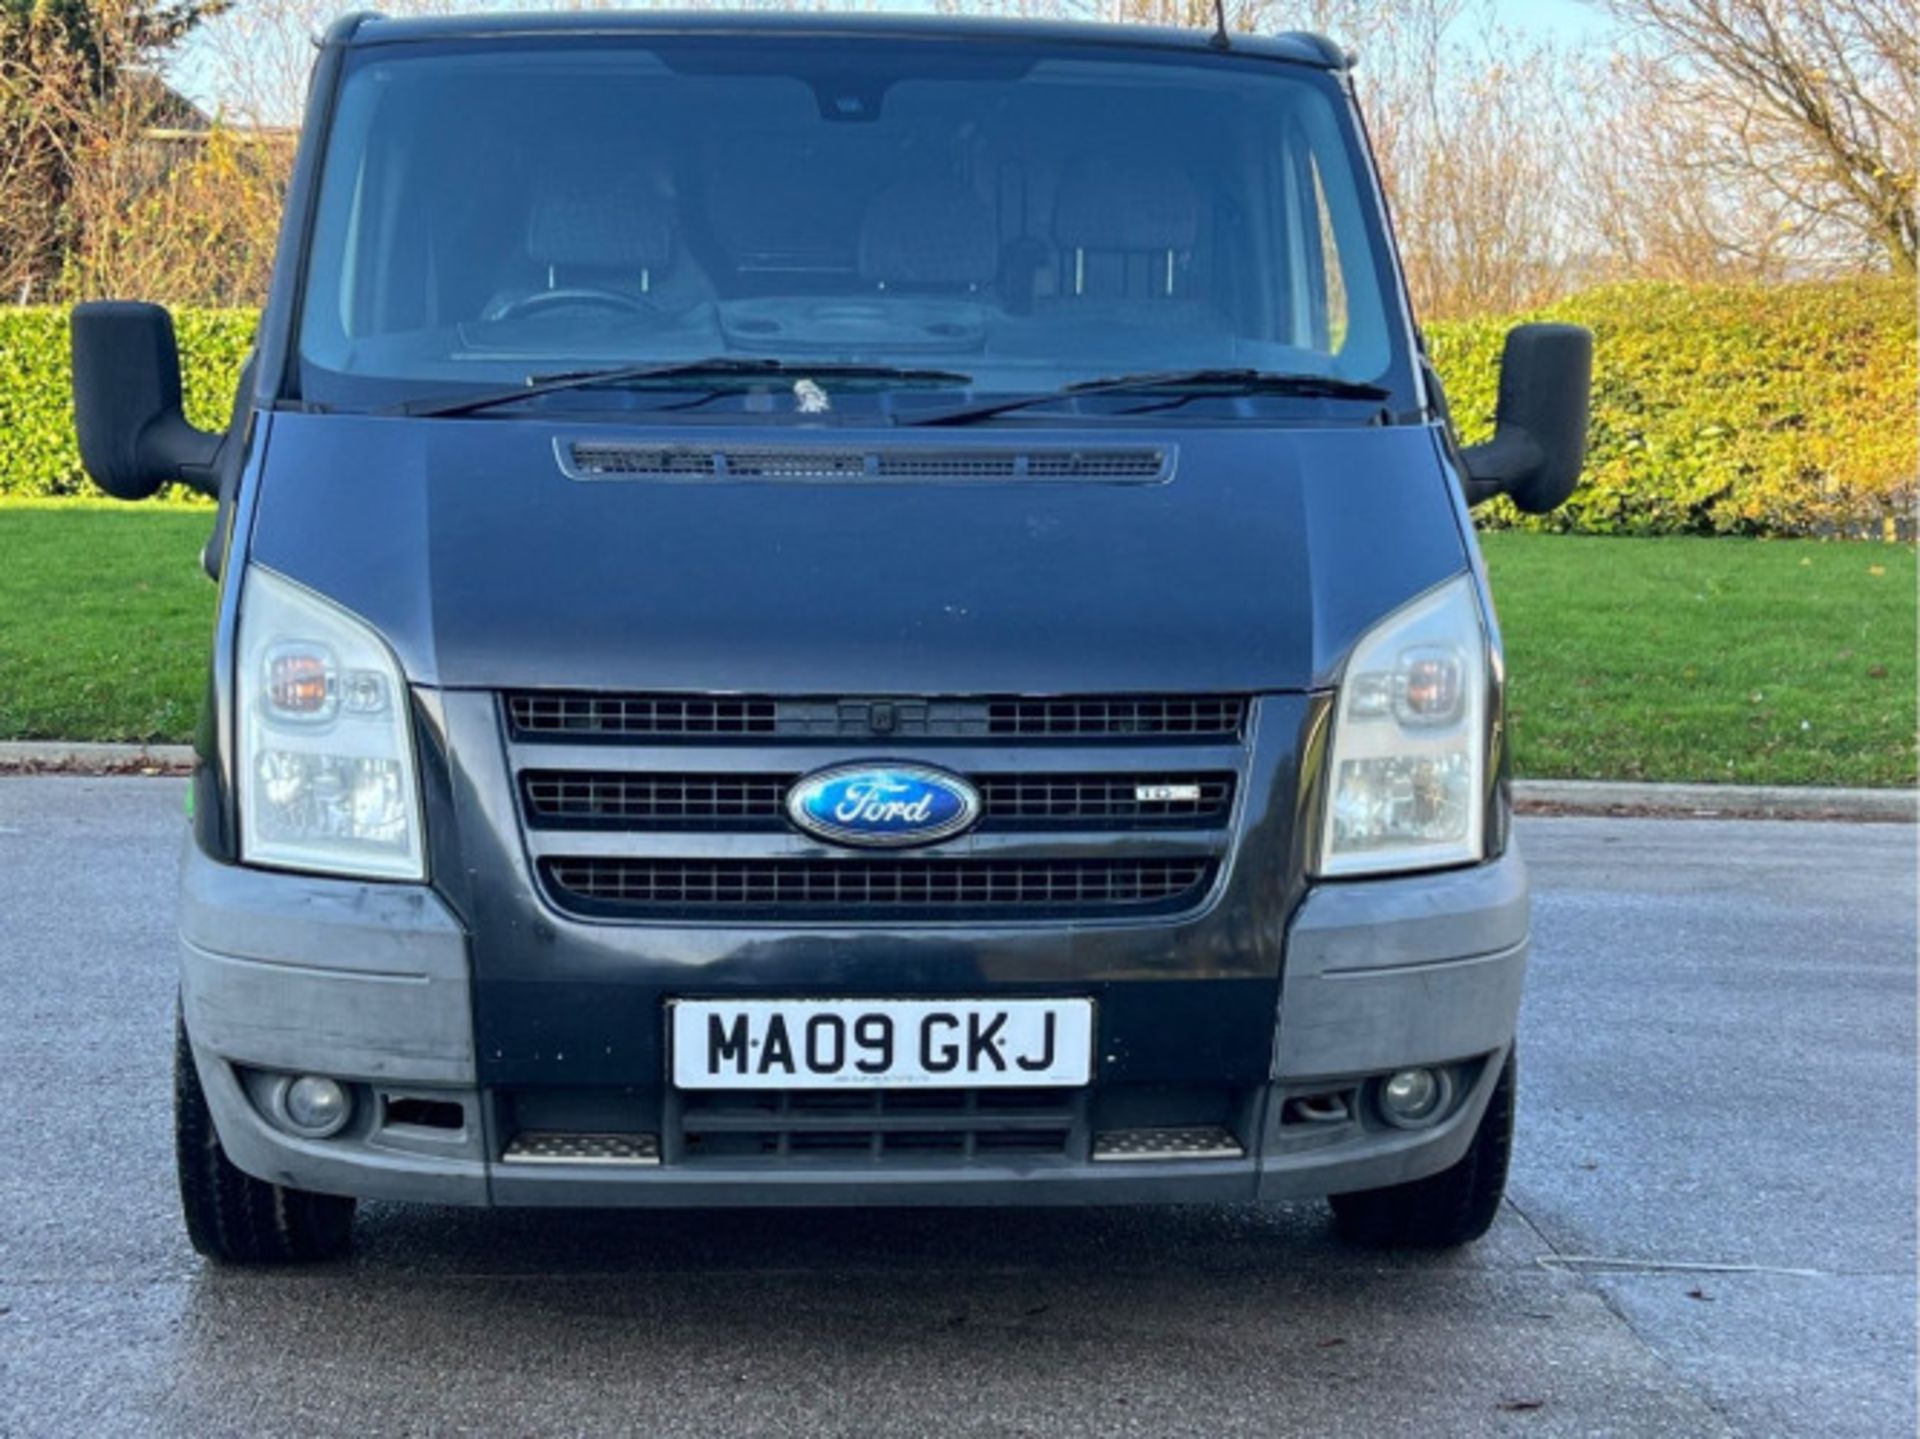 FORD TRANSIT 2.2 TDCI 260 TREND FWD L1 H1 5DR (2010) - Image 9 of 53